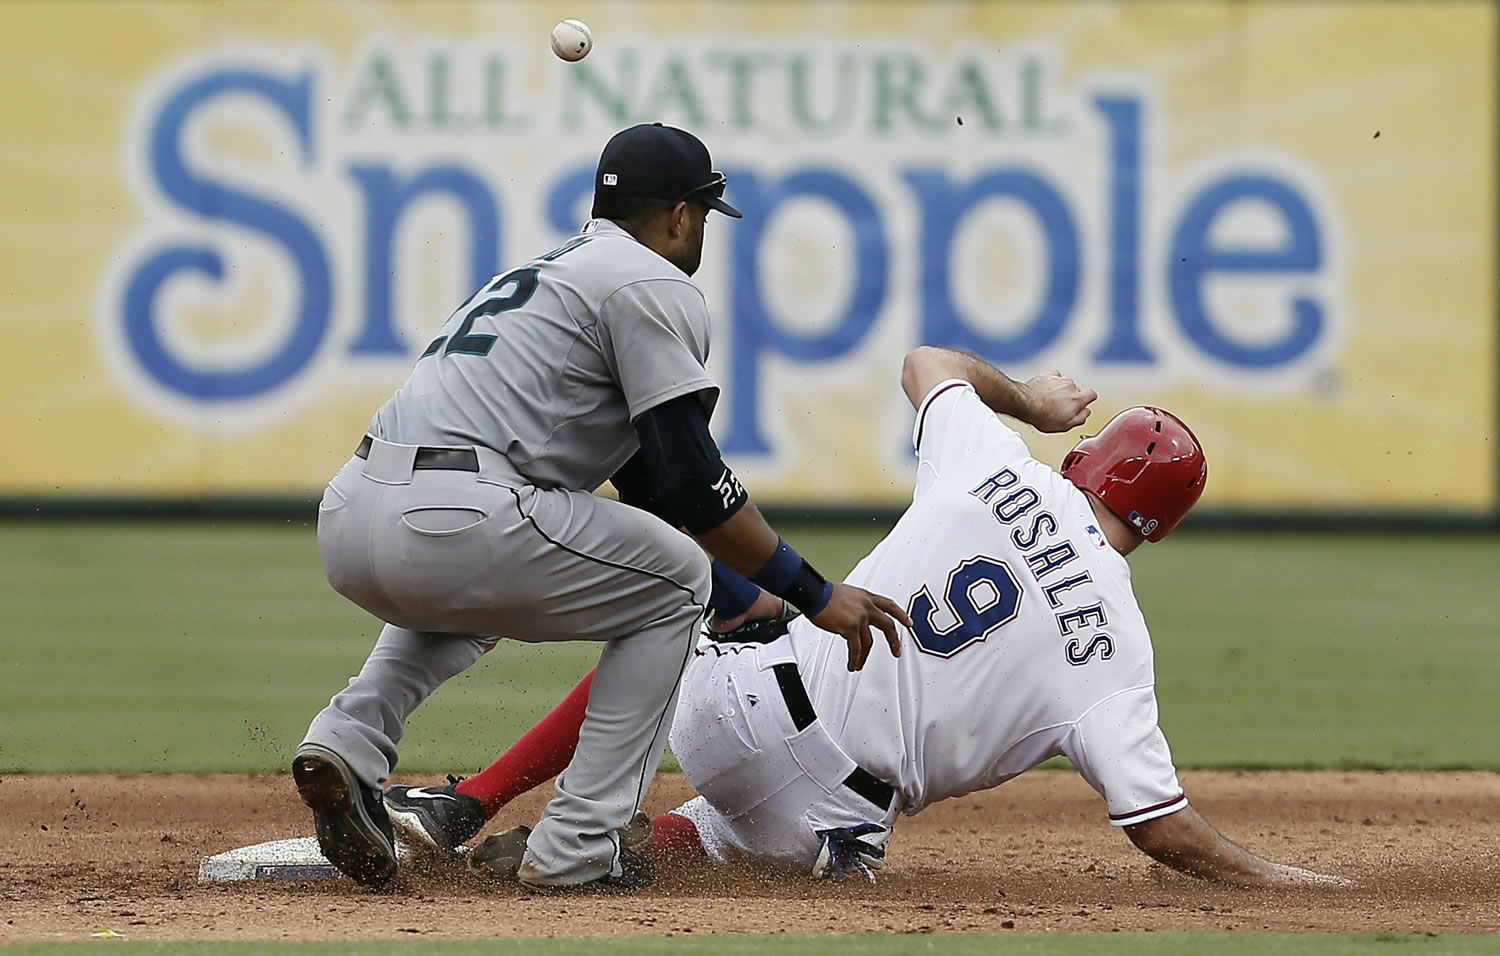 Seattle Mariners second baseman Robinson Cano (22) is unable to hold onto the throw from home as Texas Rangers' Adam Rosales (9) steals second during the sixth inning of a baseball game, Sunday, Sept. 7, 2014, in Arlington, Texas. Rosales would take third on the play.